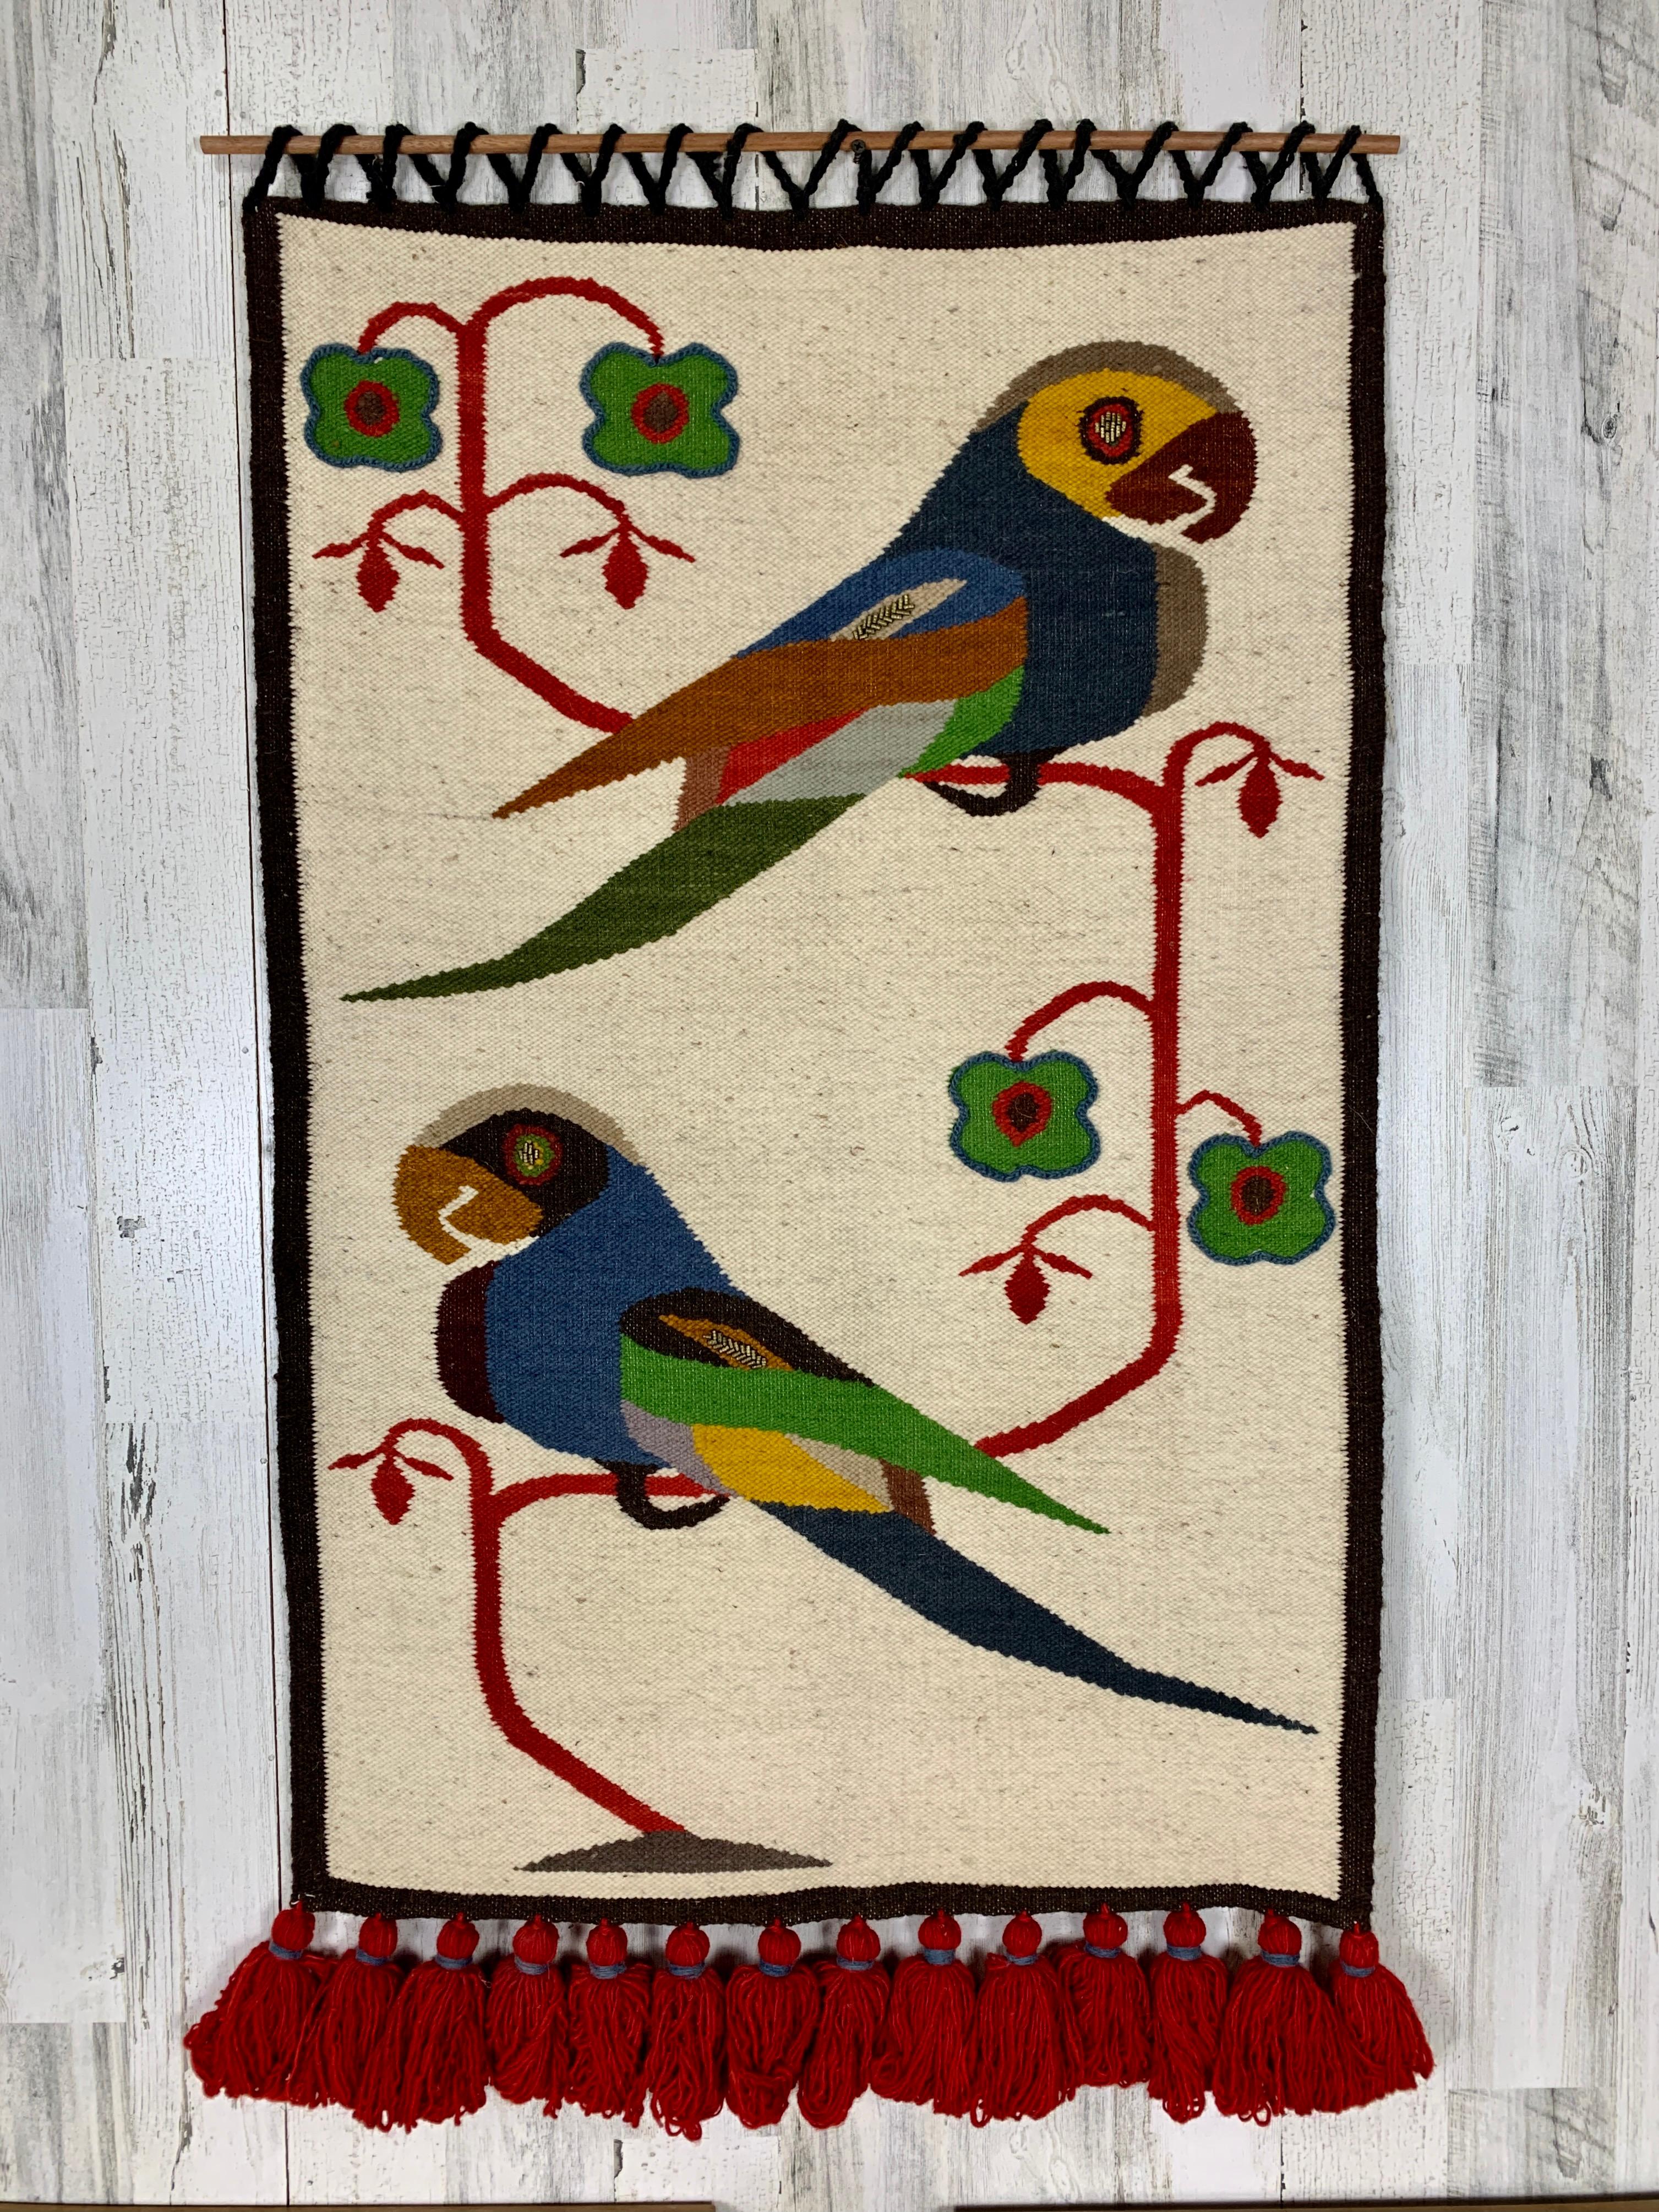 Vintage Olga Fisch folklore wall tapestry. Woven wool with metal bead accents. 
Tassels are 3in. thick.